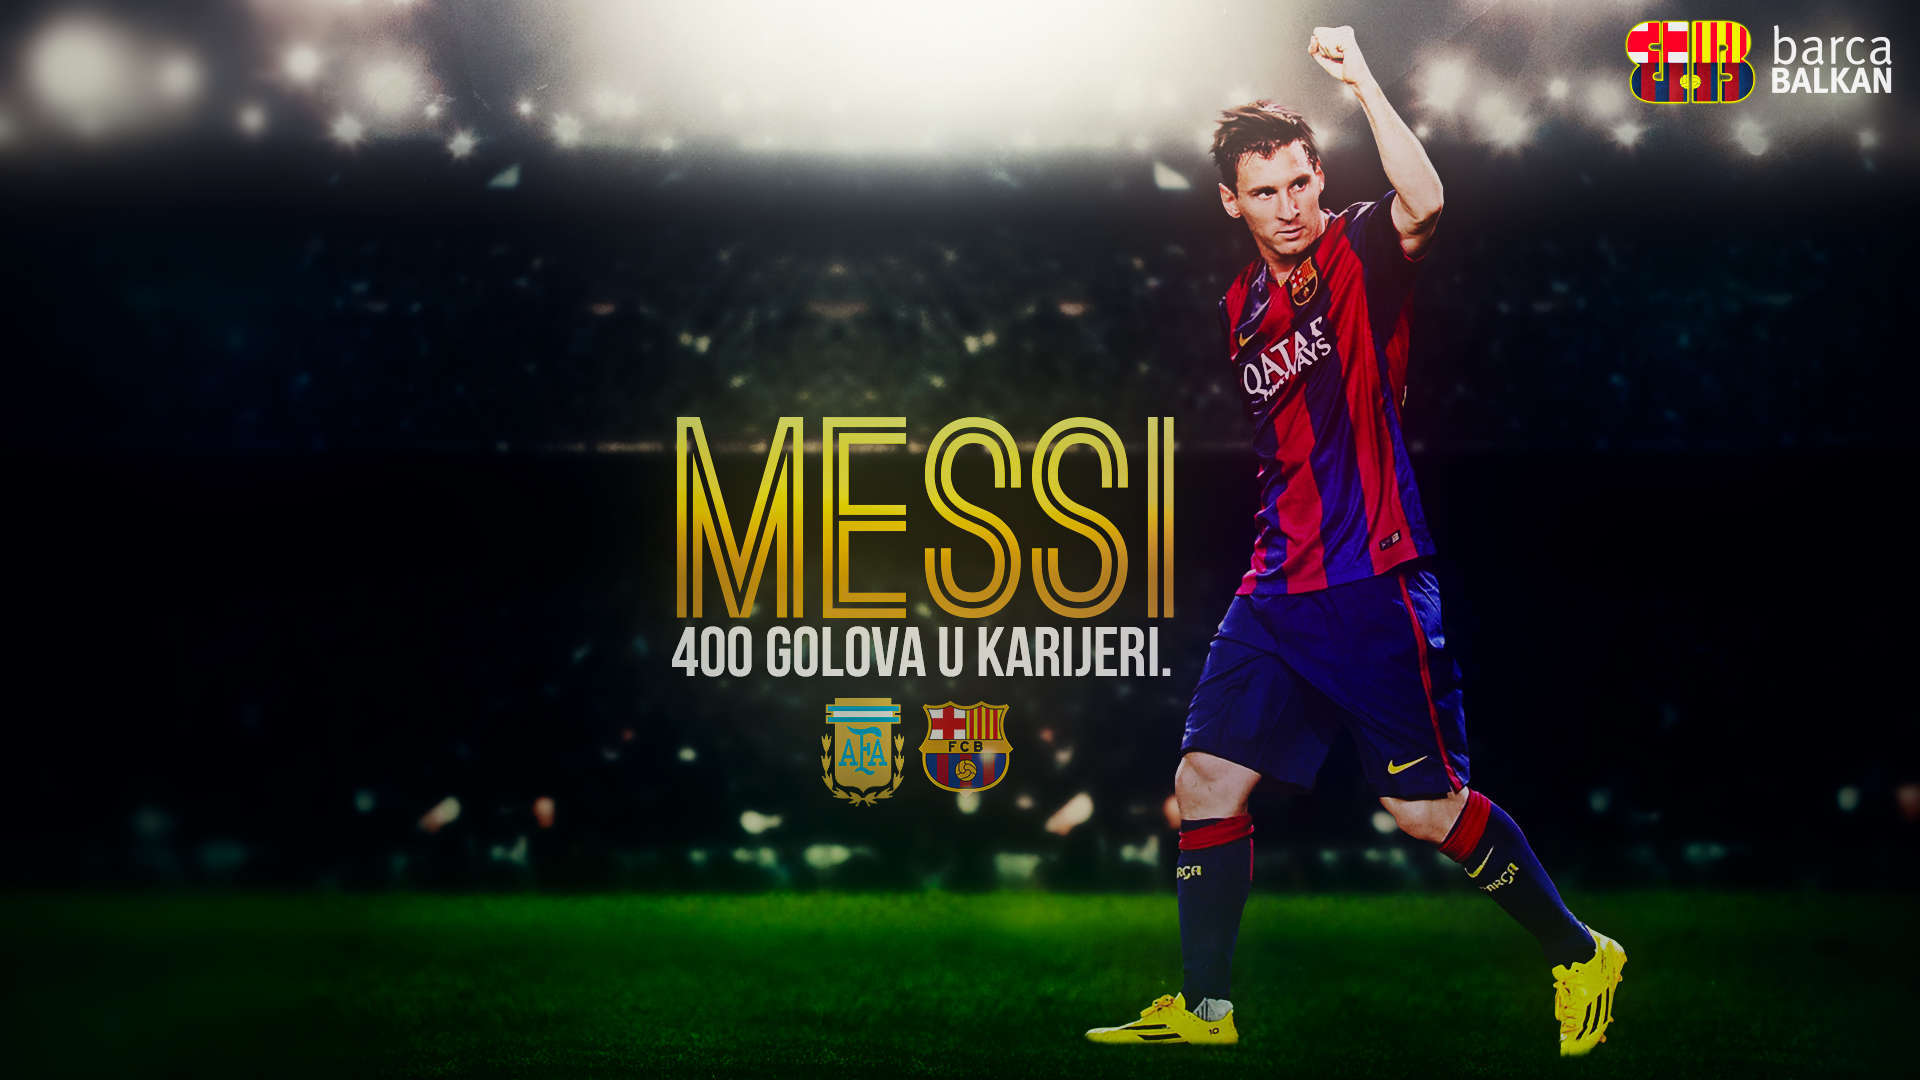 2015 Lionel Messi HD Images AMBWallpapers 1920x1080